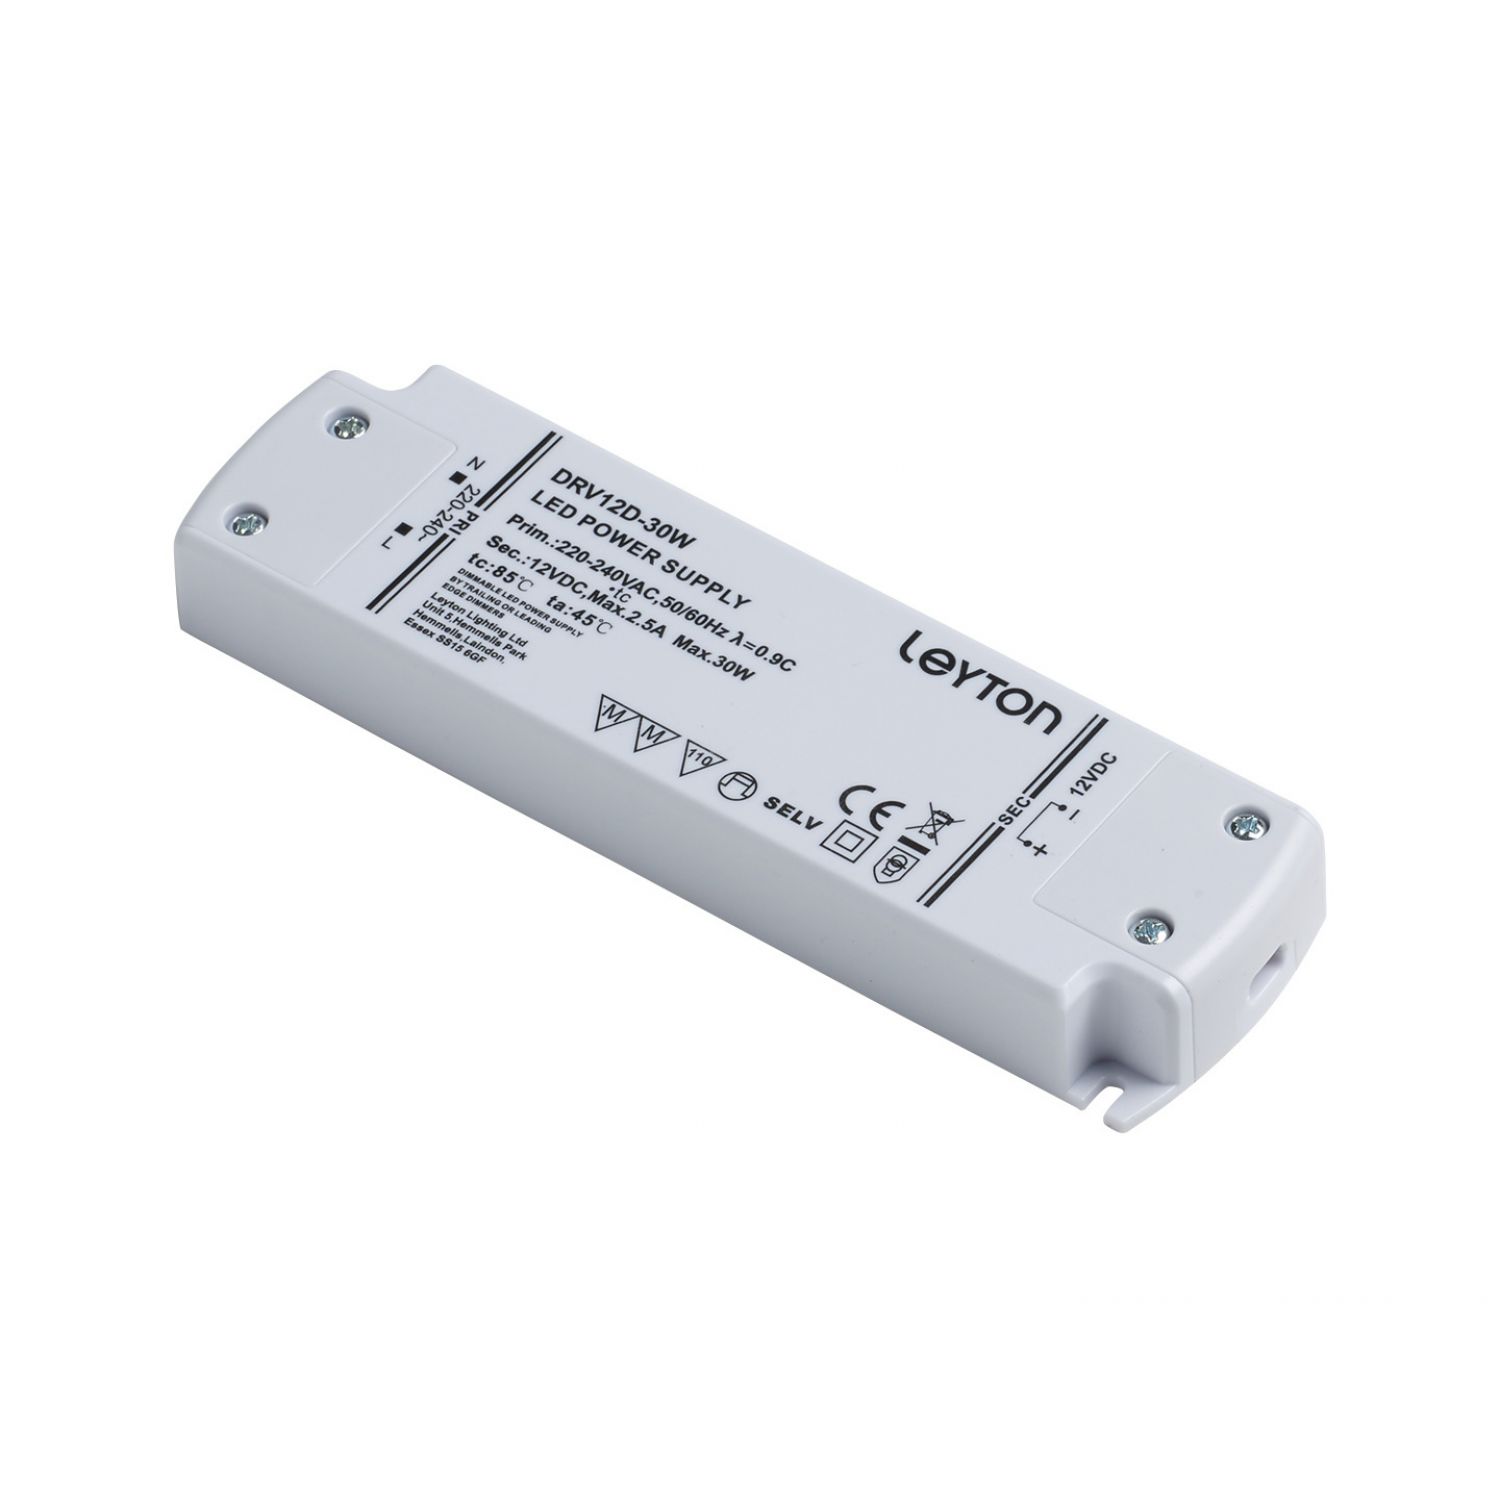 12v, 30w Mains Dimmable LED Driver, terminal screws output, DRV12D-30W-TB -  from £28.99